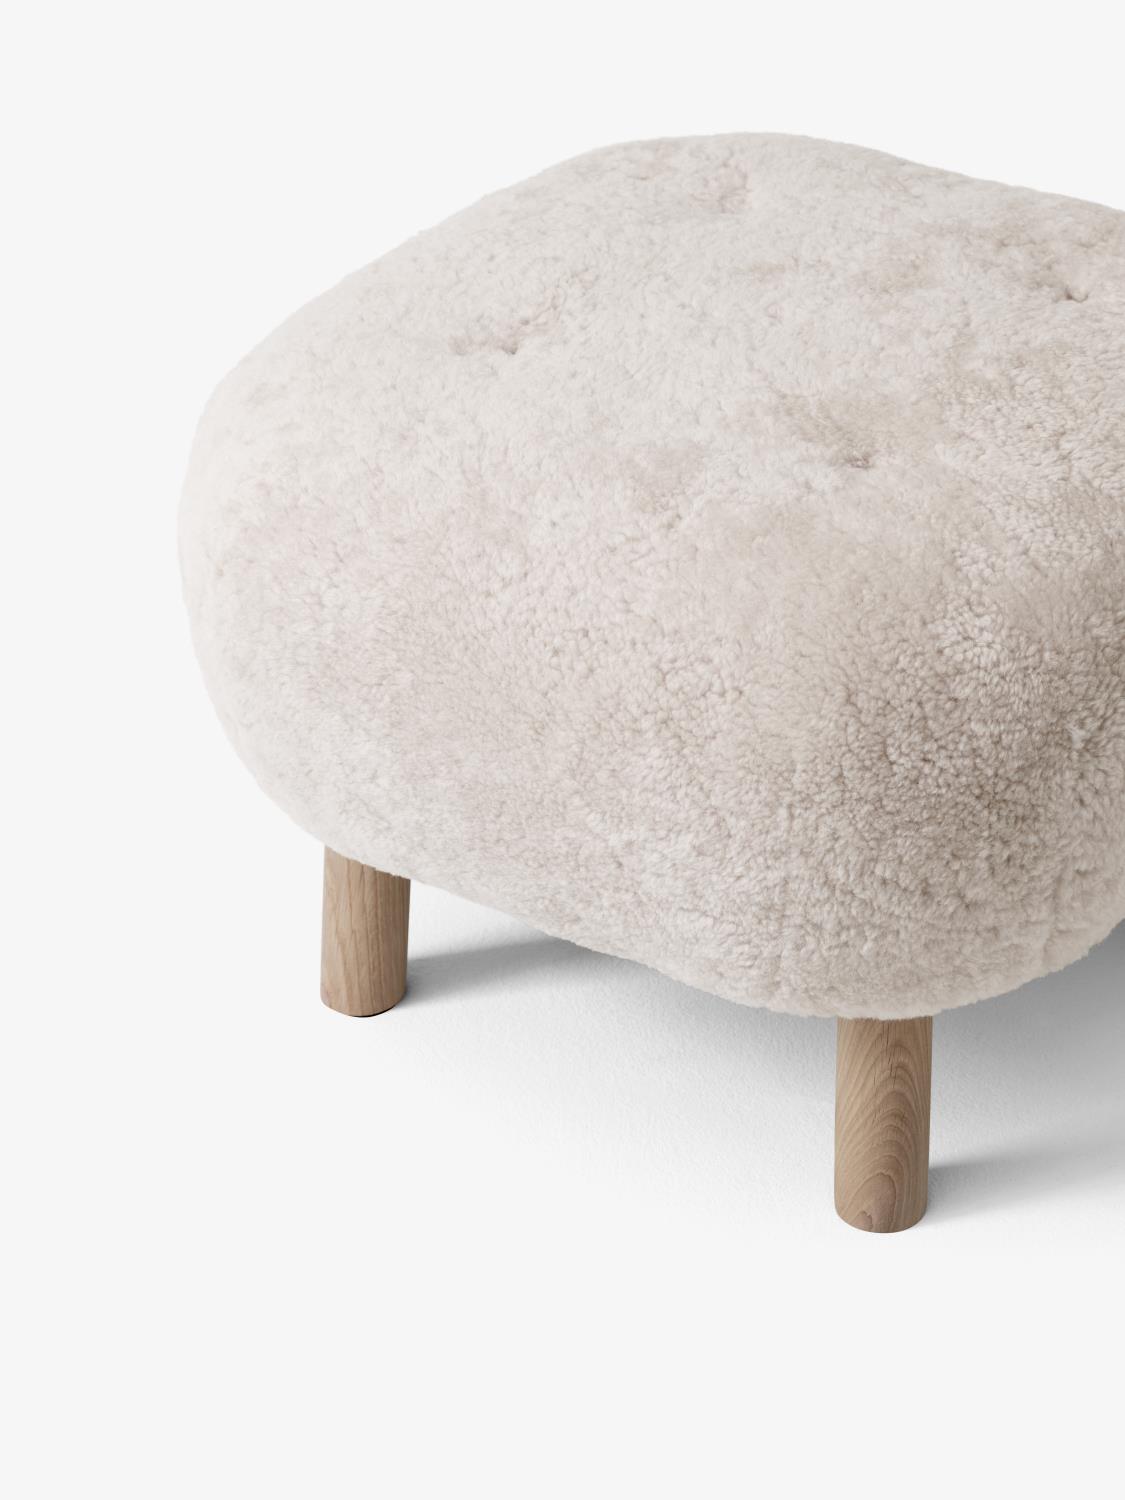 &Tradition - Pouf ATD1 - Sheepskin Moonlight and White Oiled Oak